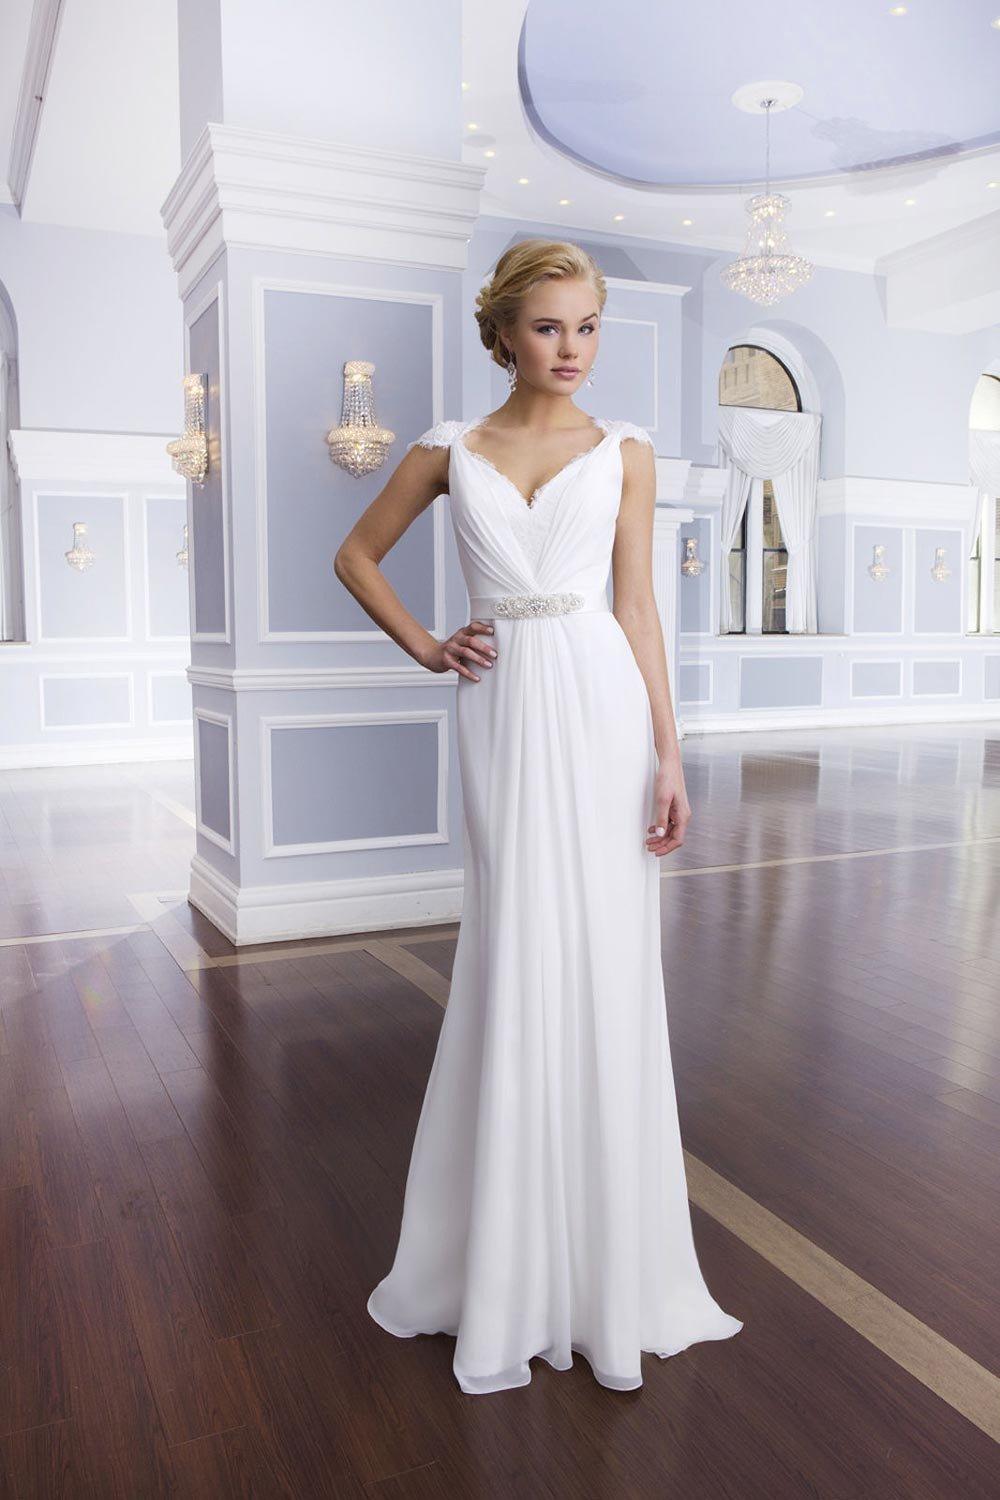 The Best Grecian Style Wedding Dresses ...